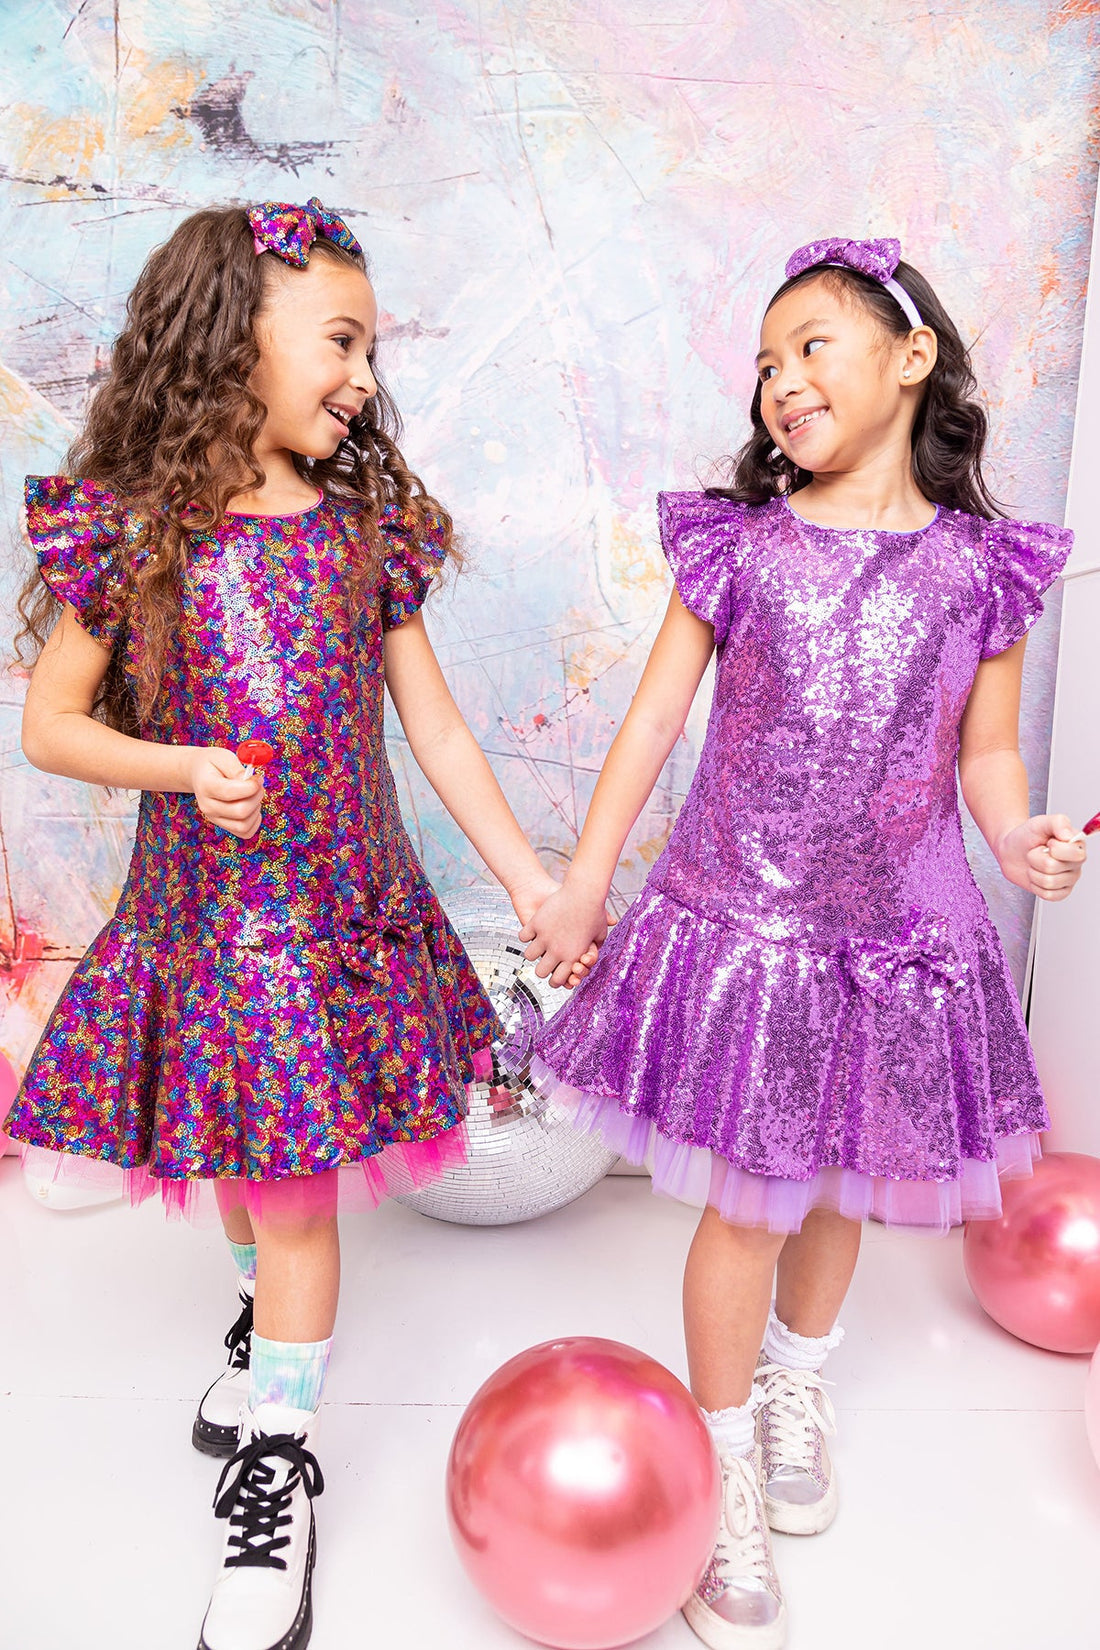 Sequin Ruffle Sleeve Tutu Girl Party Dress by AS530 Kids Dream - Girl Formal Dresses